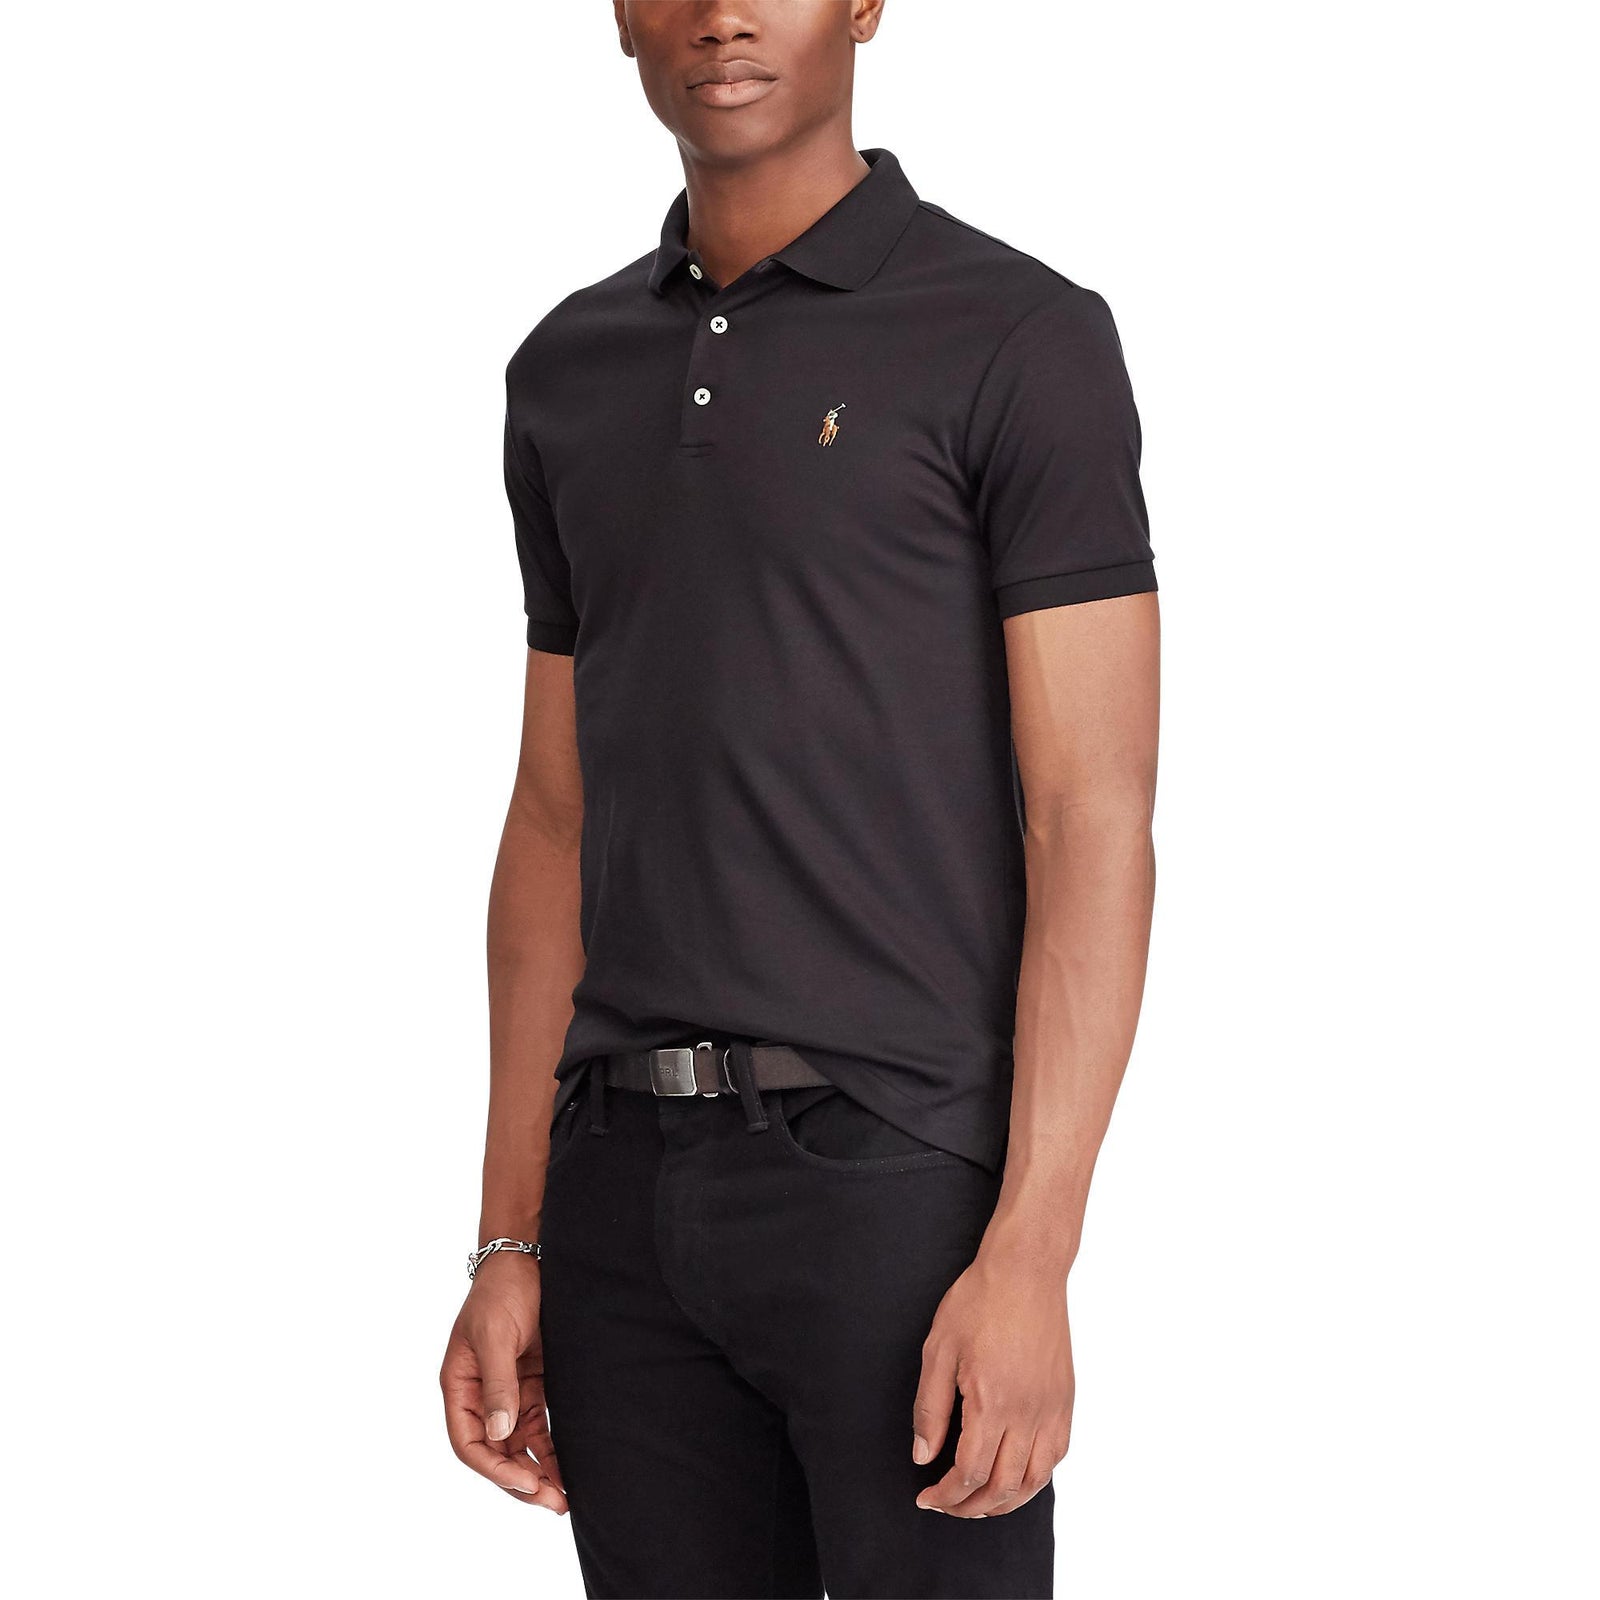 SLIM FIT SOFT-TOUCH POLO SHIRT - Yooto